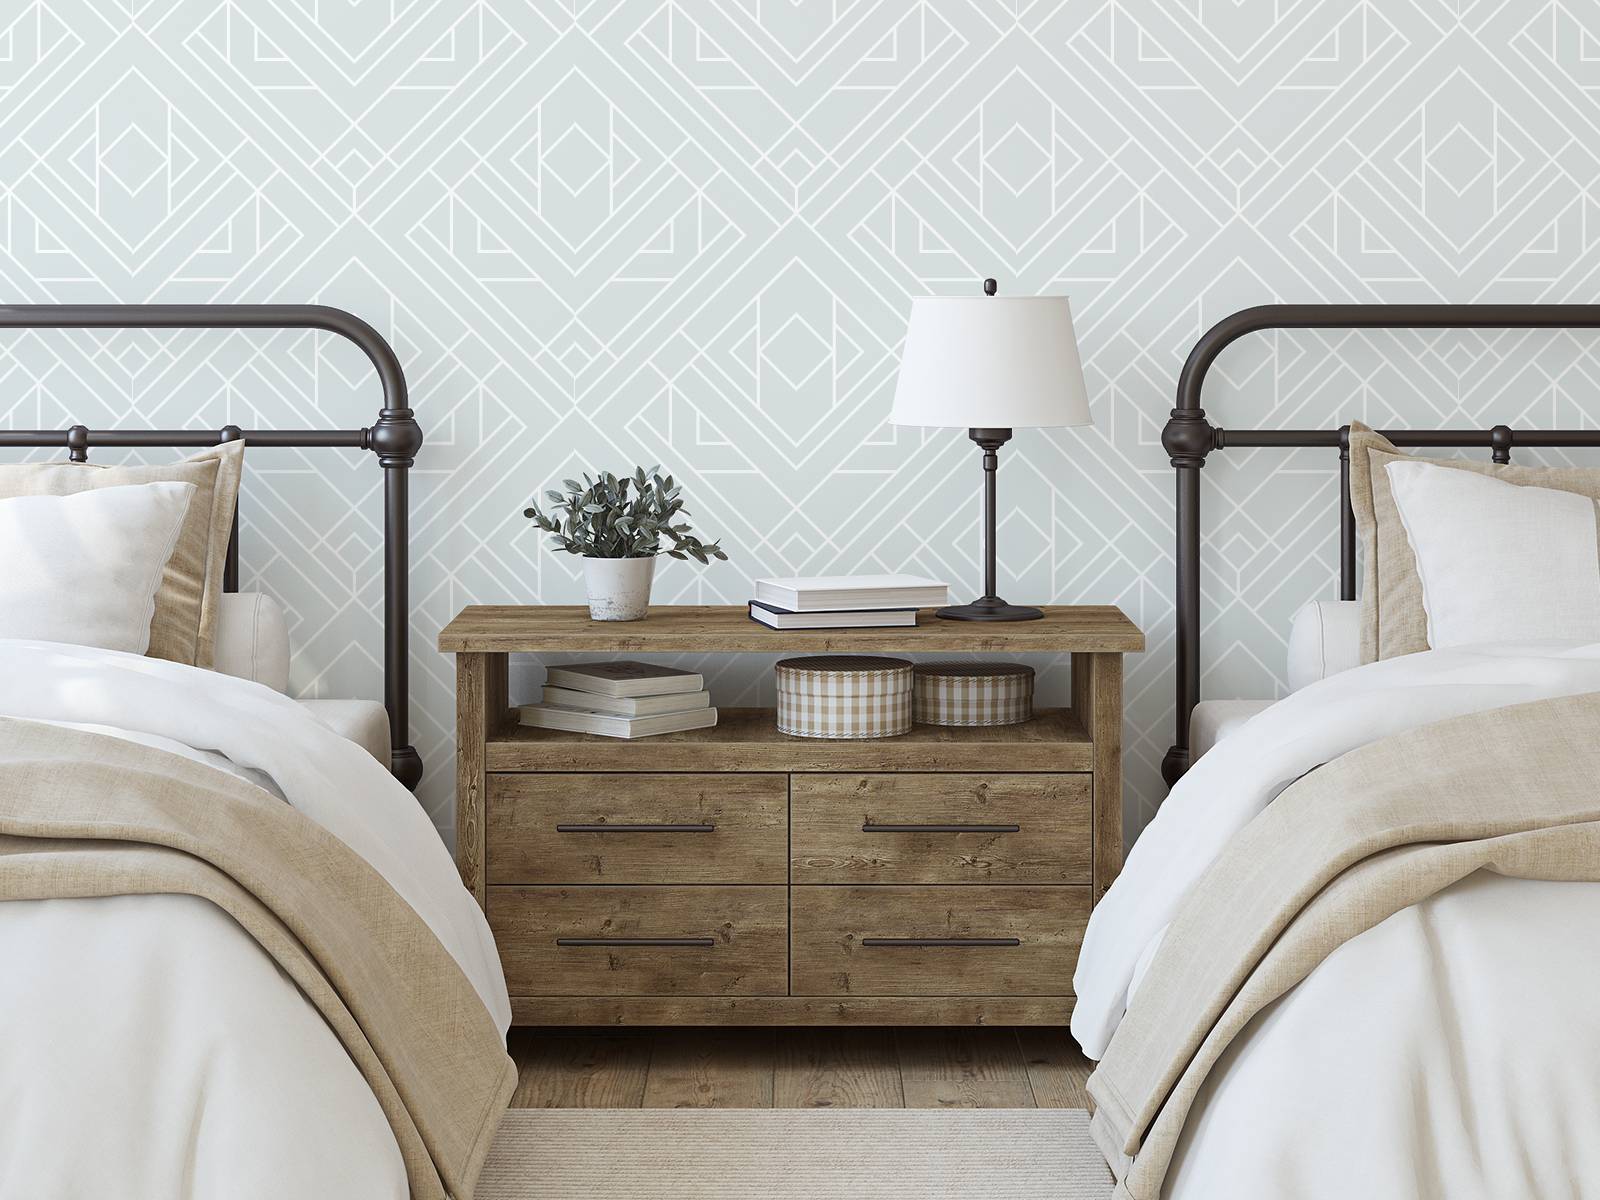 The Art of Mixing Patterns: How to Combine Wallpaper and Textiles for a Cohesive Look